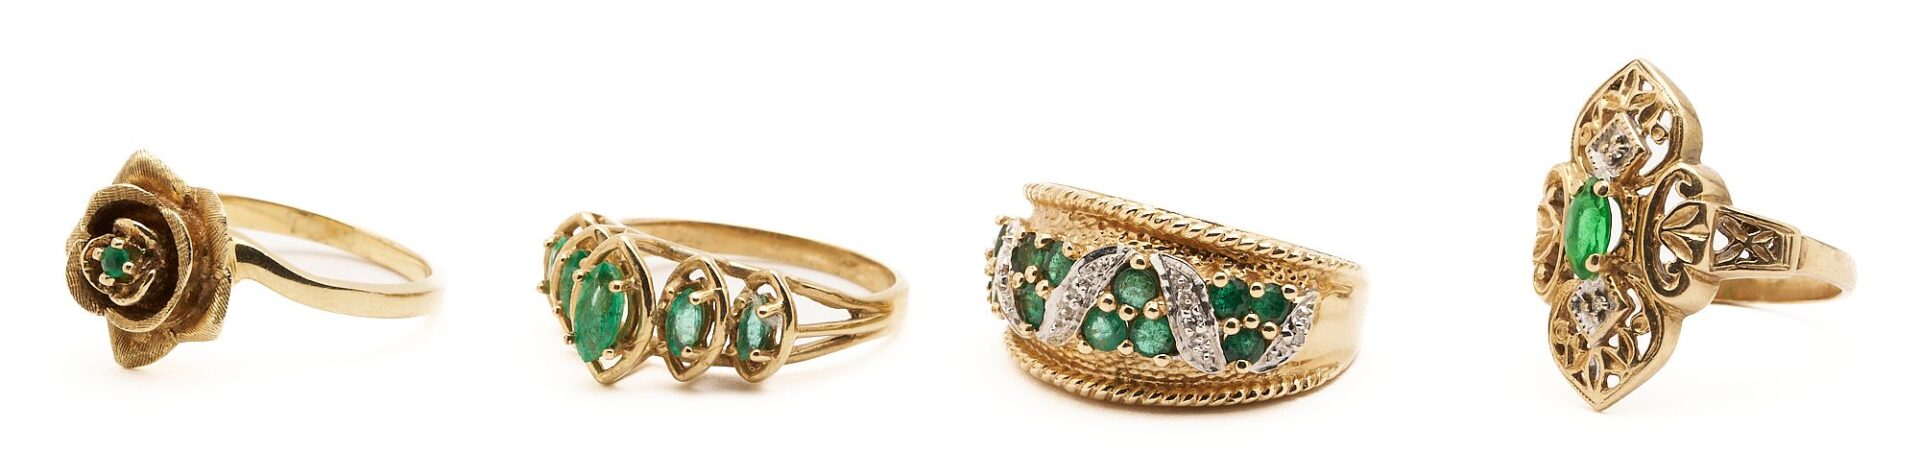 Lot 860: Four Gold and Green Gemstone Rings